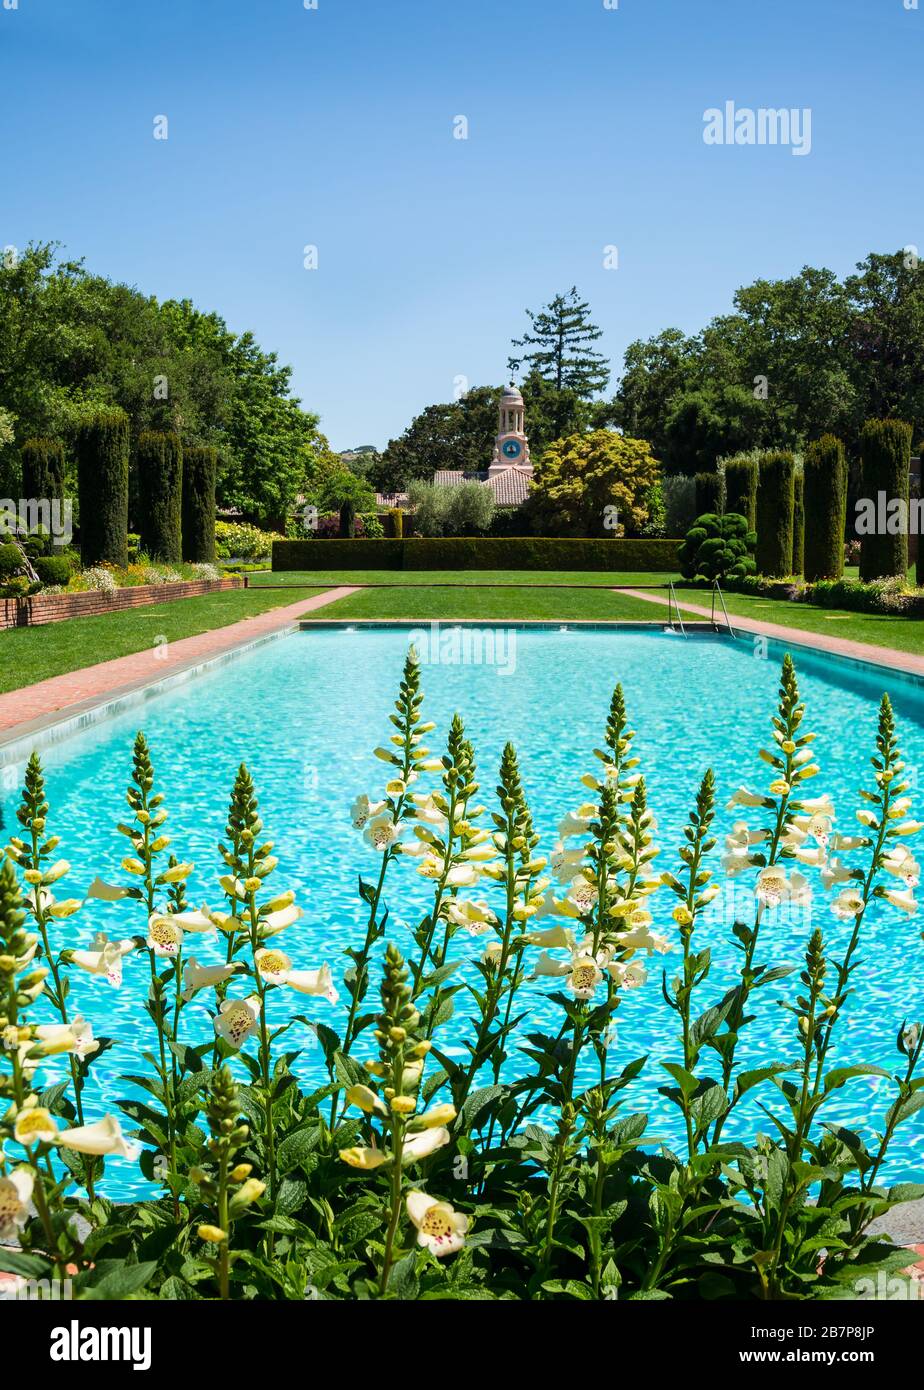 Garden with pool and flowers Stock Photo